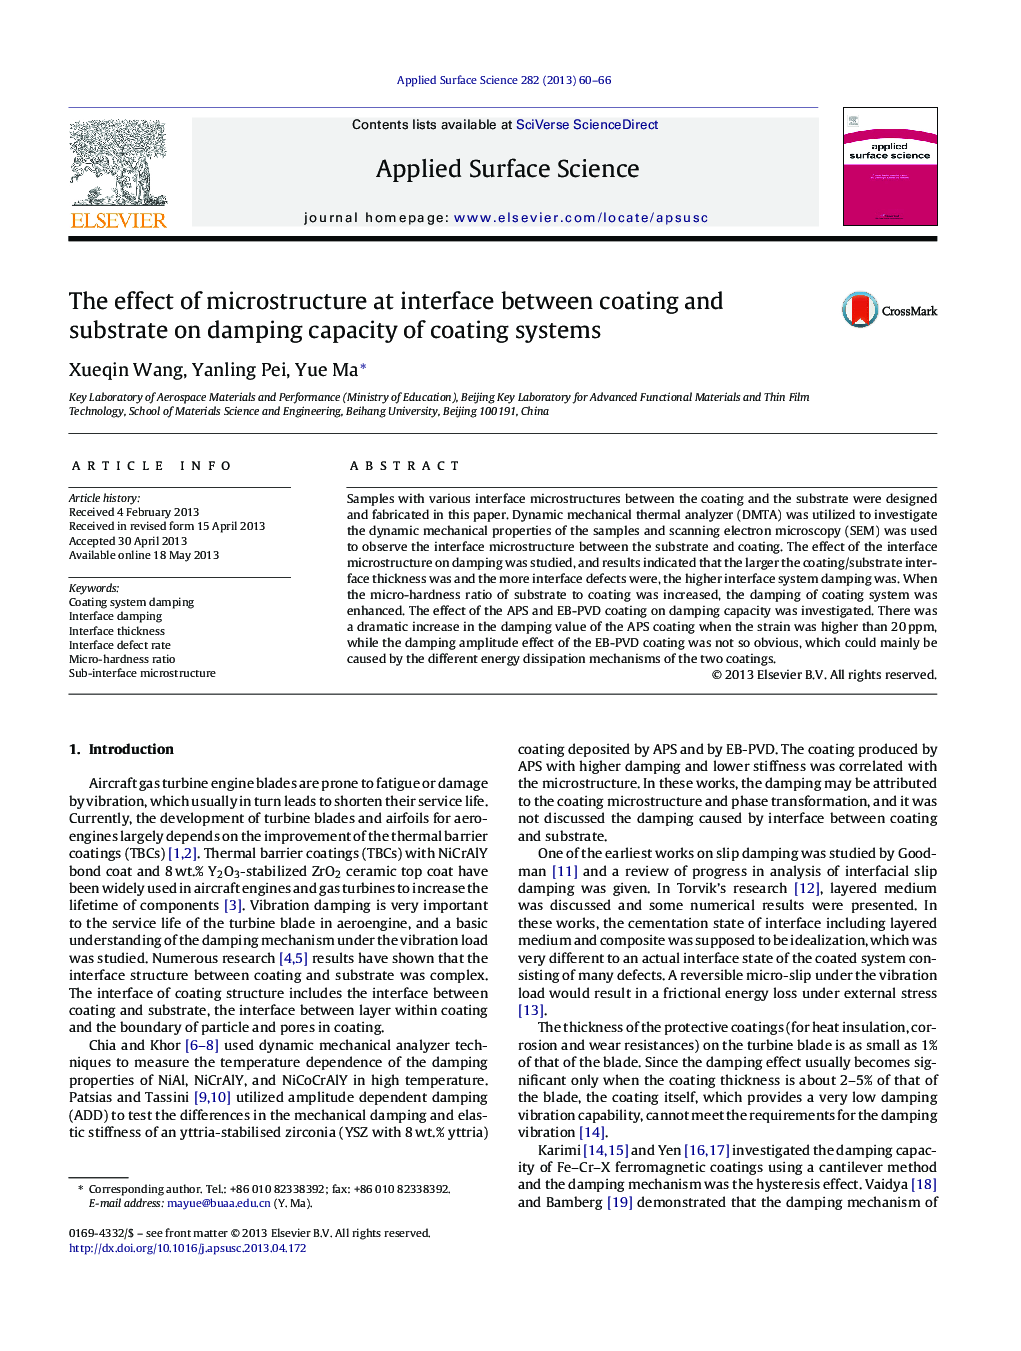 The effect of microstructure at interface between coating and substrate on damping capacity of coating systems